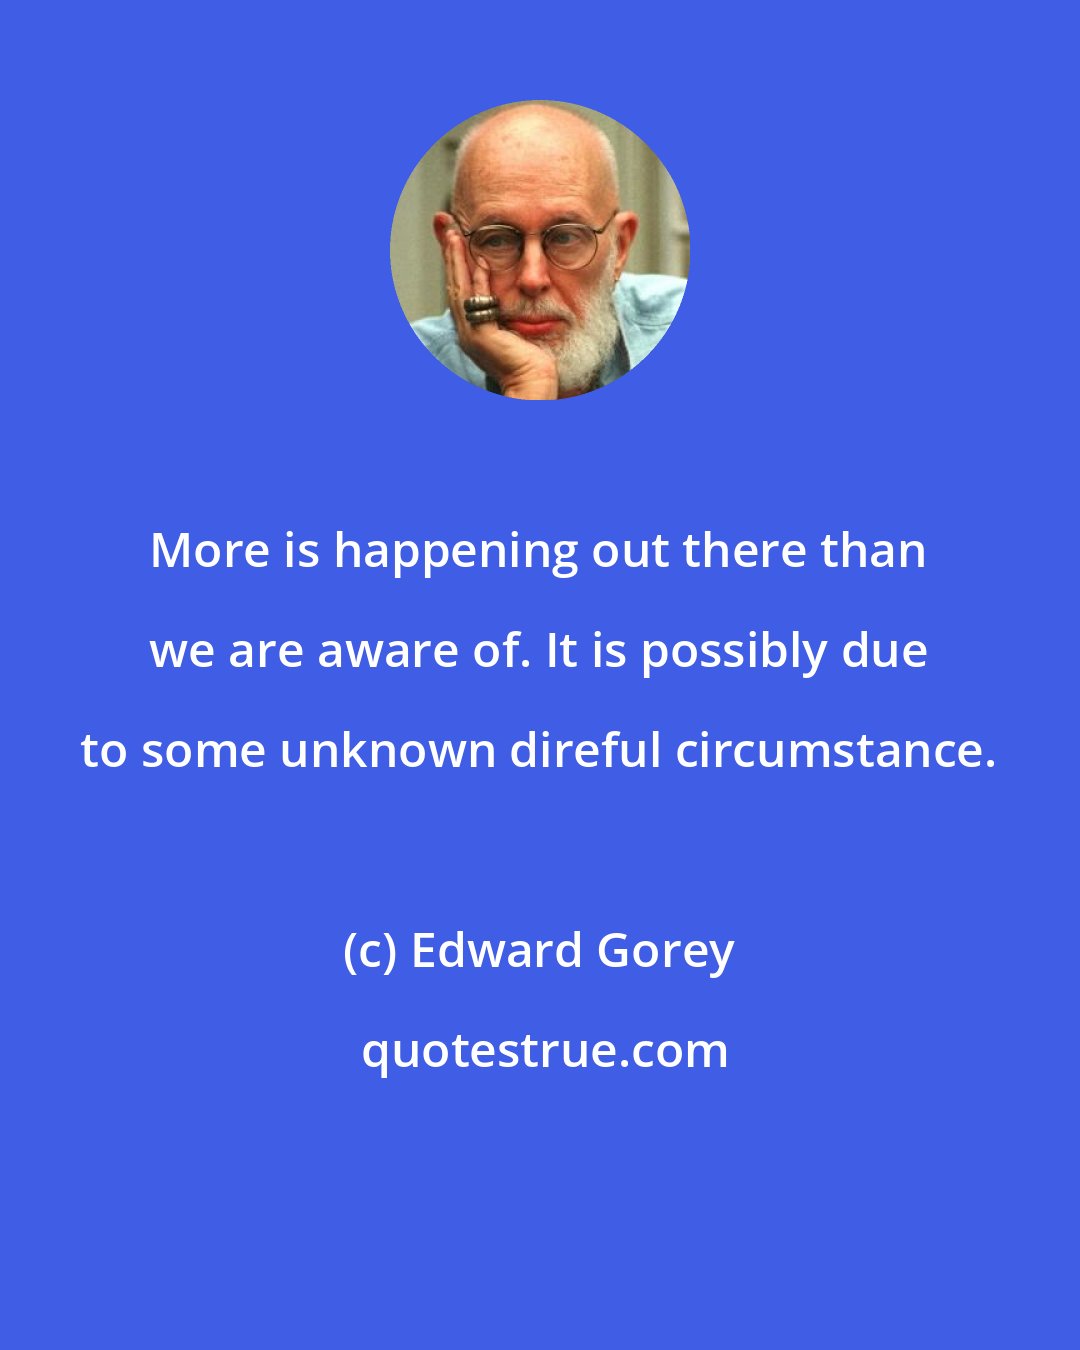 Edward Gorey: More is happening out there than we are aware of. It is possibly due to some unknown direful circumstance.